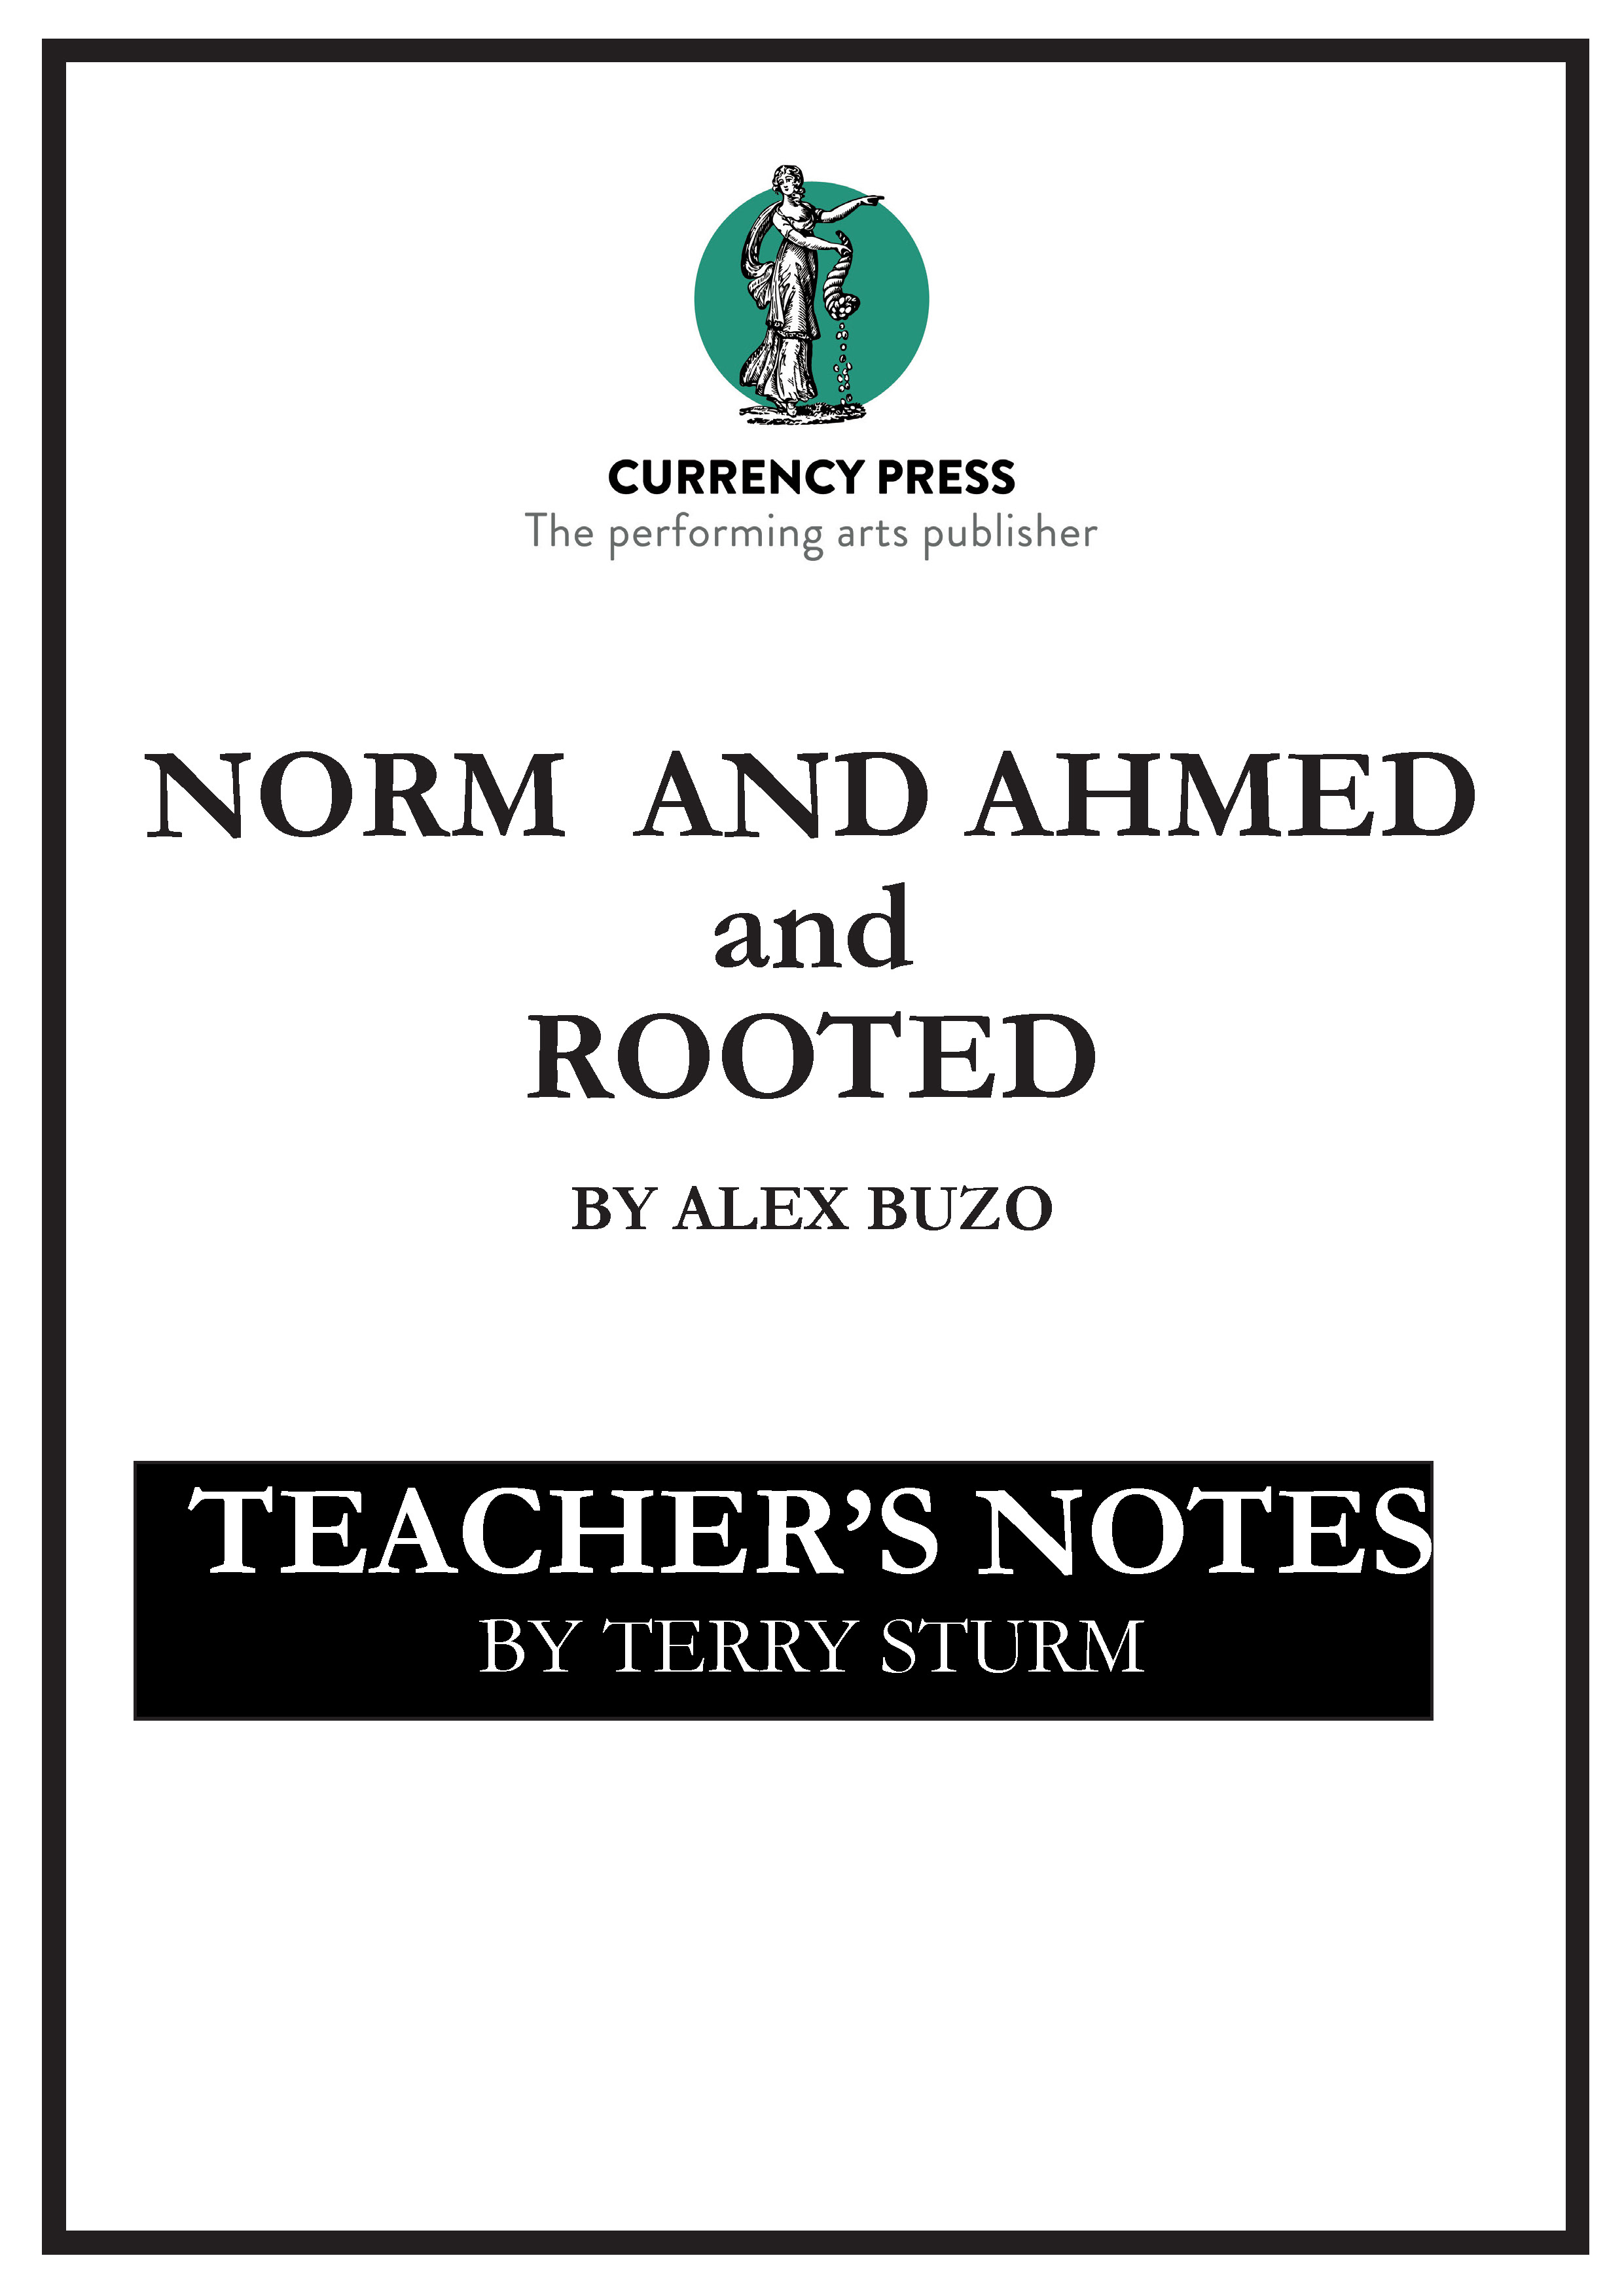 StudyGuide NormAhmed Rooted cover